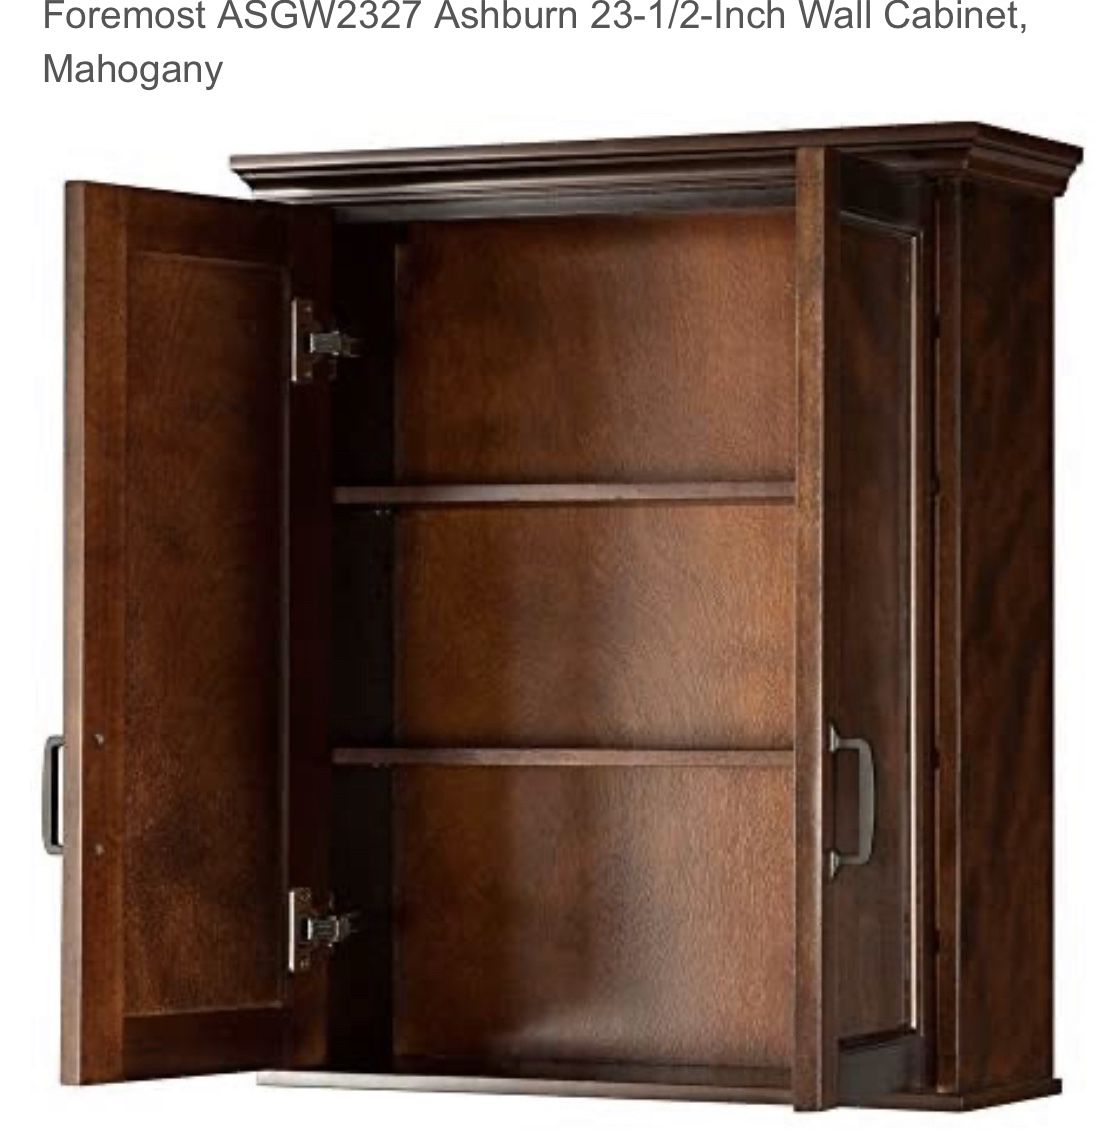 Mahogany Wood Wall Cabinet NEW Unopened Box / Garage, bath or laundry room store price $250.00